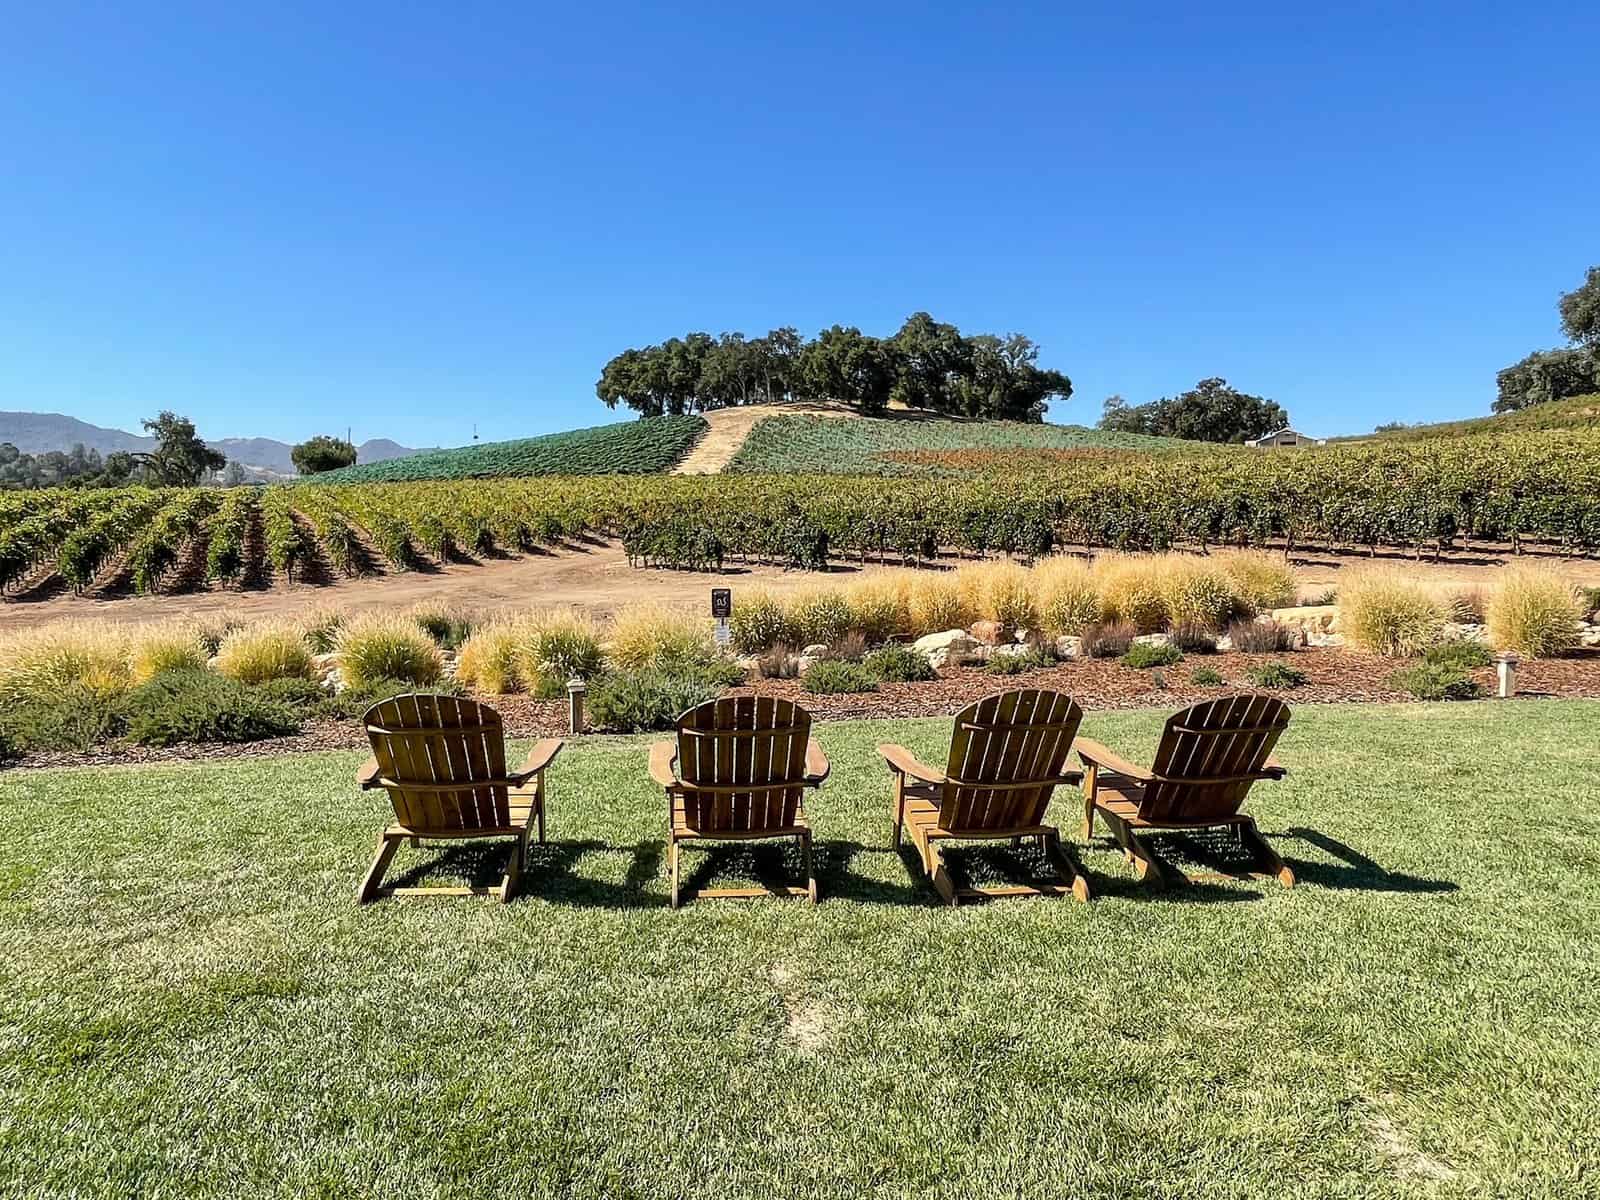 Four chairs on a grassy area made of old wine barrels at a winery in Paso Robles.